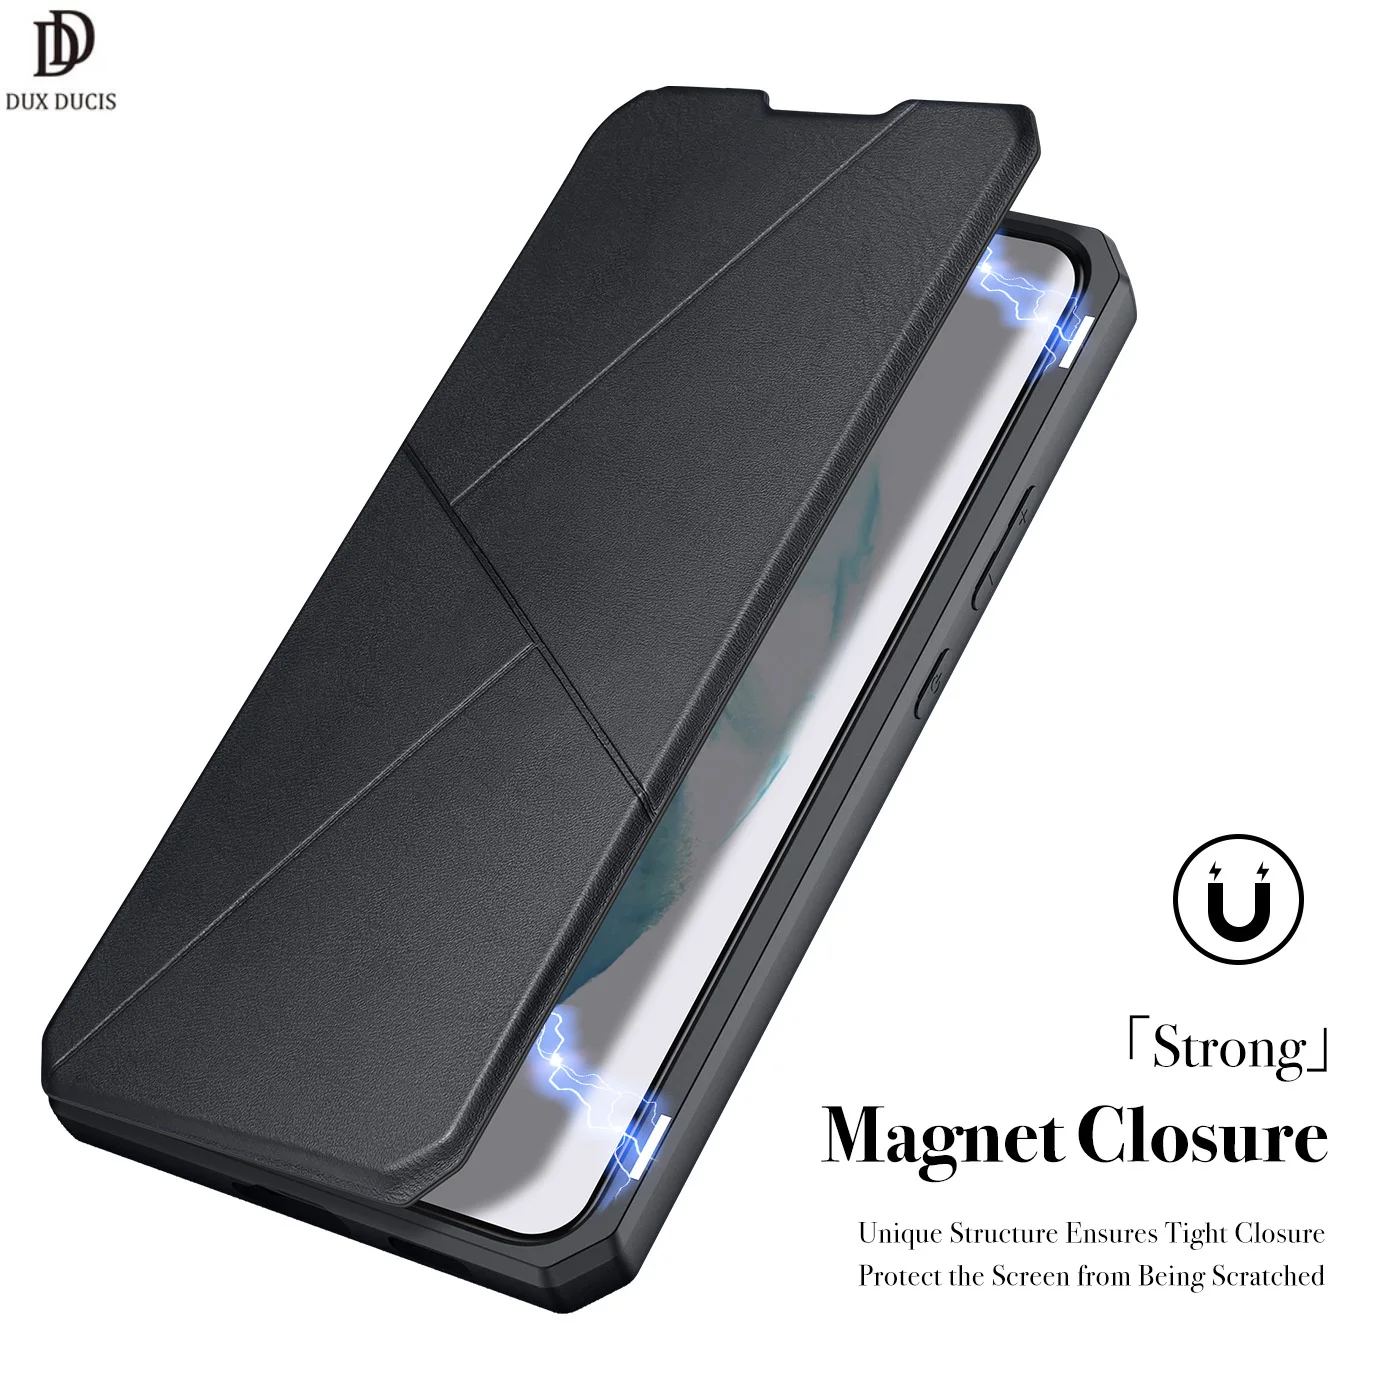 

Flip Cover 360° Real Full Protection Luxury Leather Wallet Cover For Samsung Galaxy S22Ultra Case Magnetic Closure Skin X Series